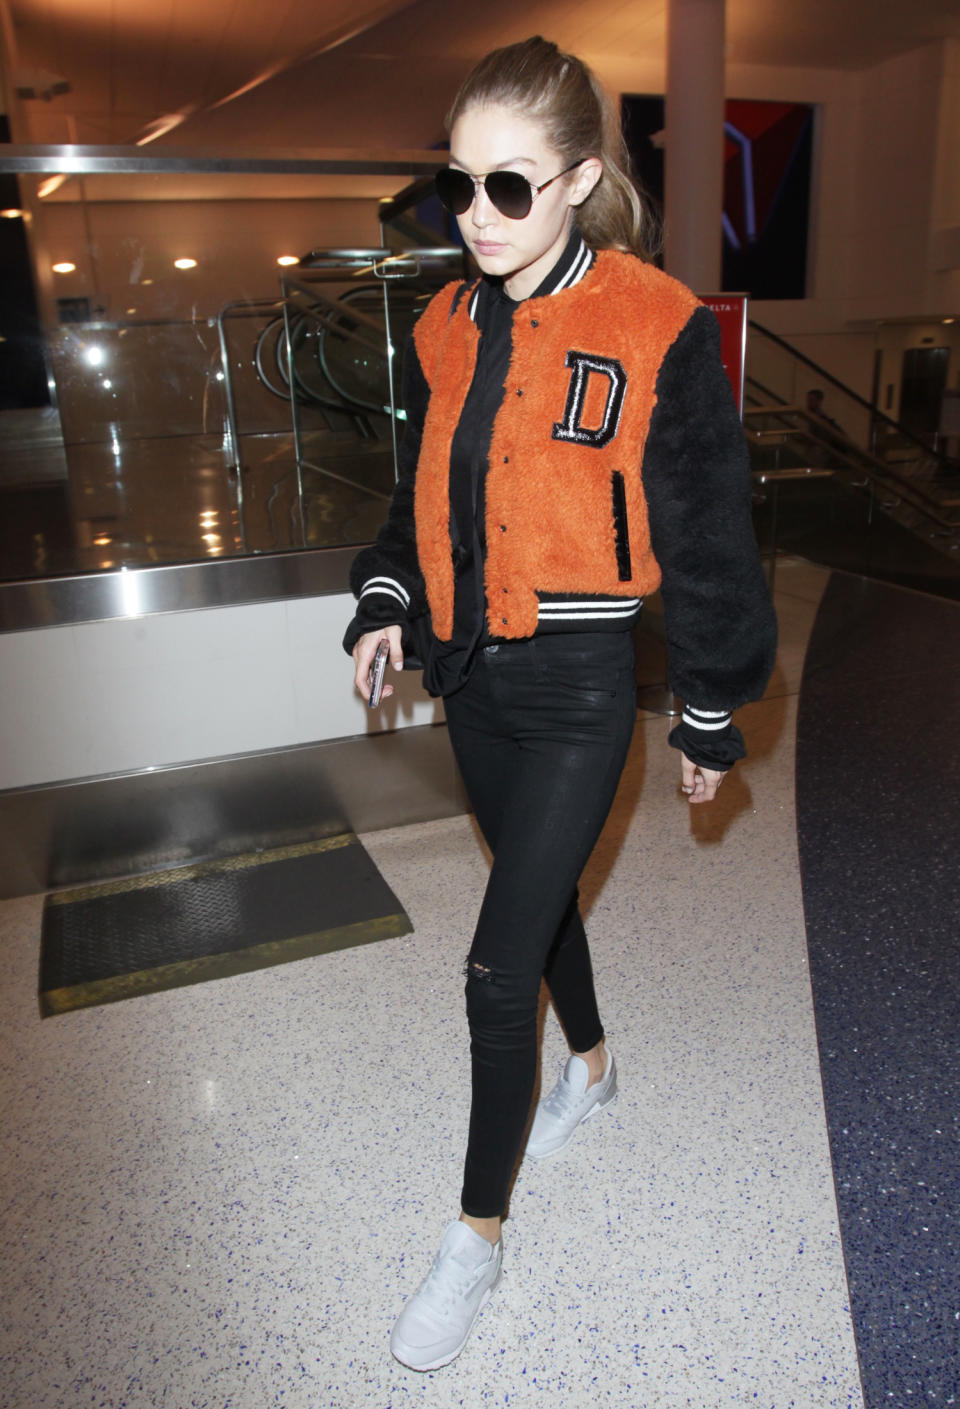 <p>Hadid showed off her preppy side in an orange Diesel varsity jacket, black skinny jeans, and white sneakers while catching a flight.</p>